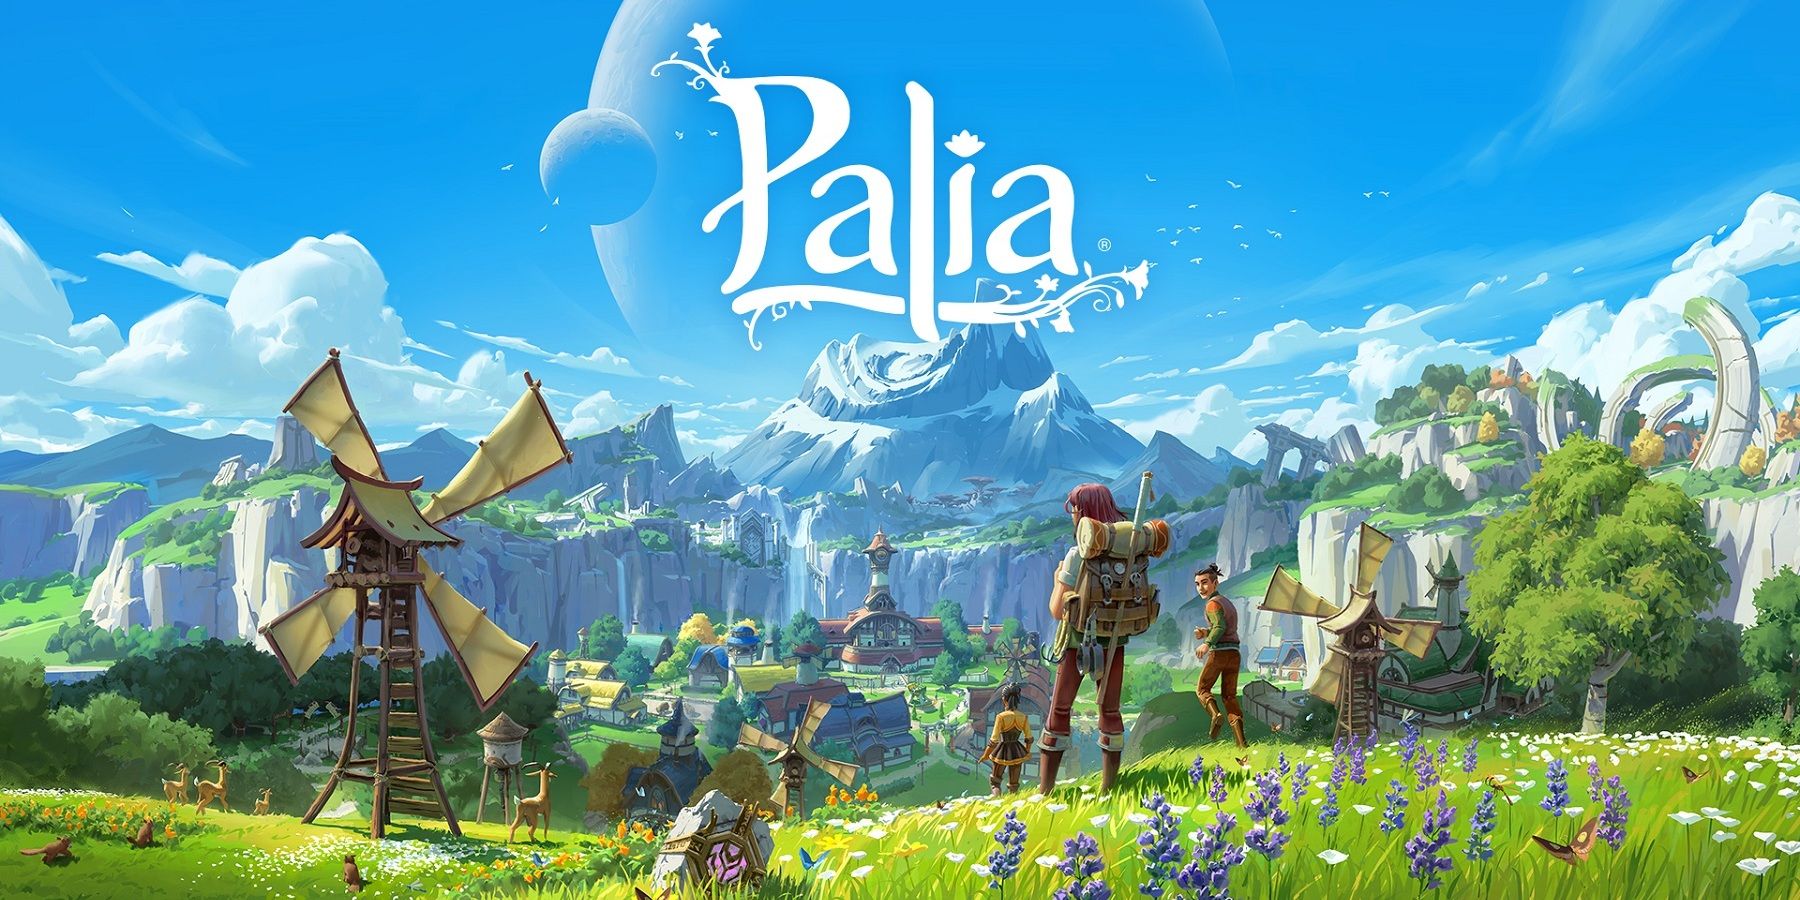 gamers-can-play-animal-crossing-like-palia-now